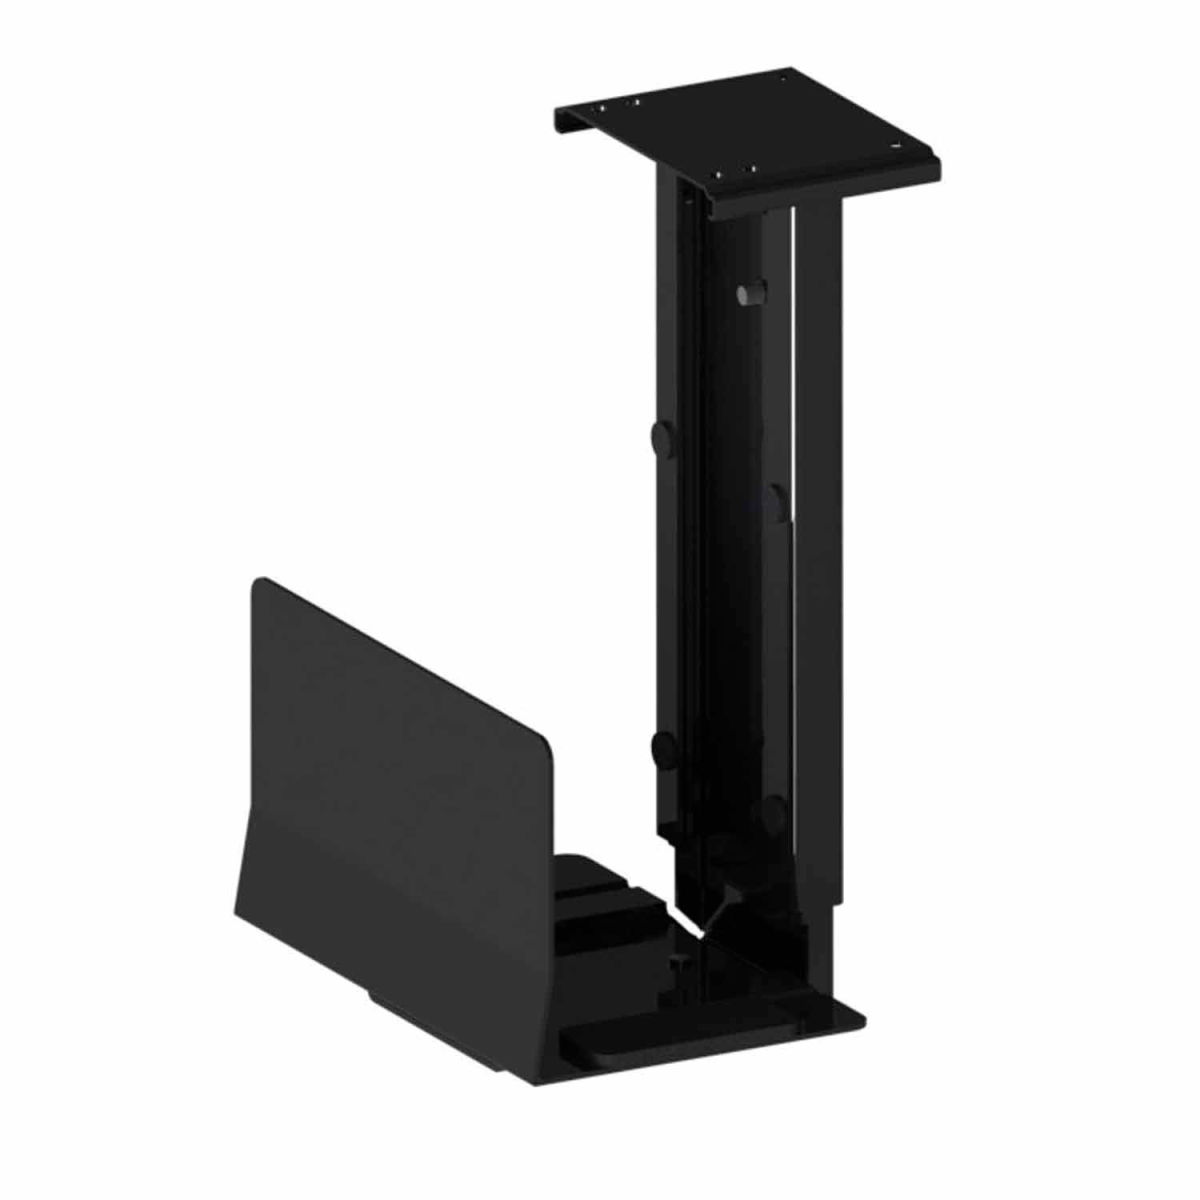 Picture of KA Manufacturing B1874837 40 lbs RightAngle 202CPU Fixed Under Desk Adjustable Black CPU Holder